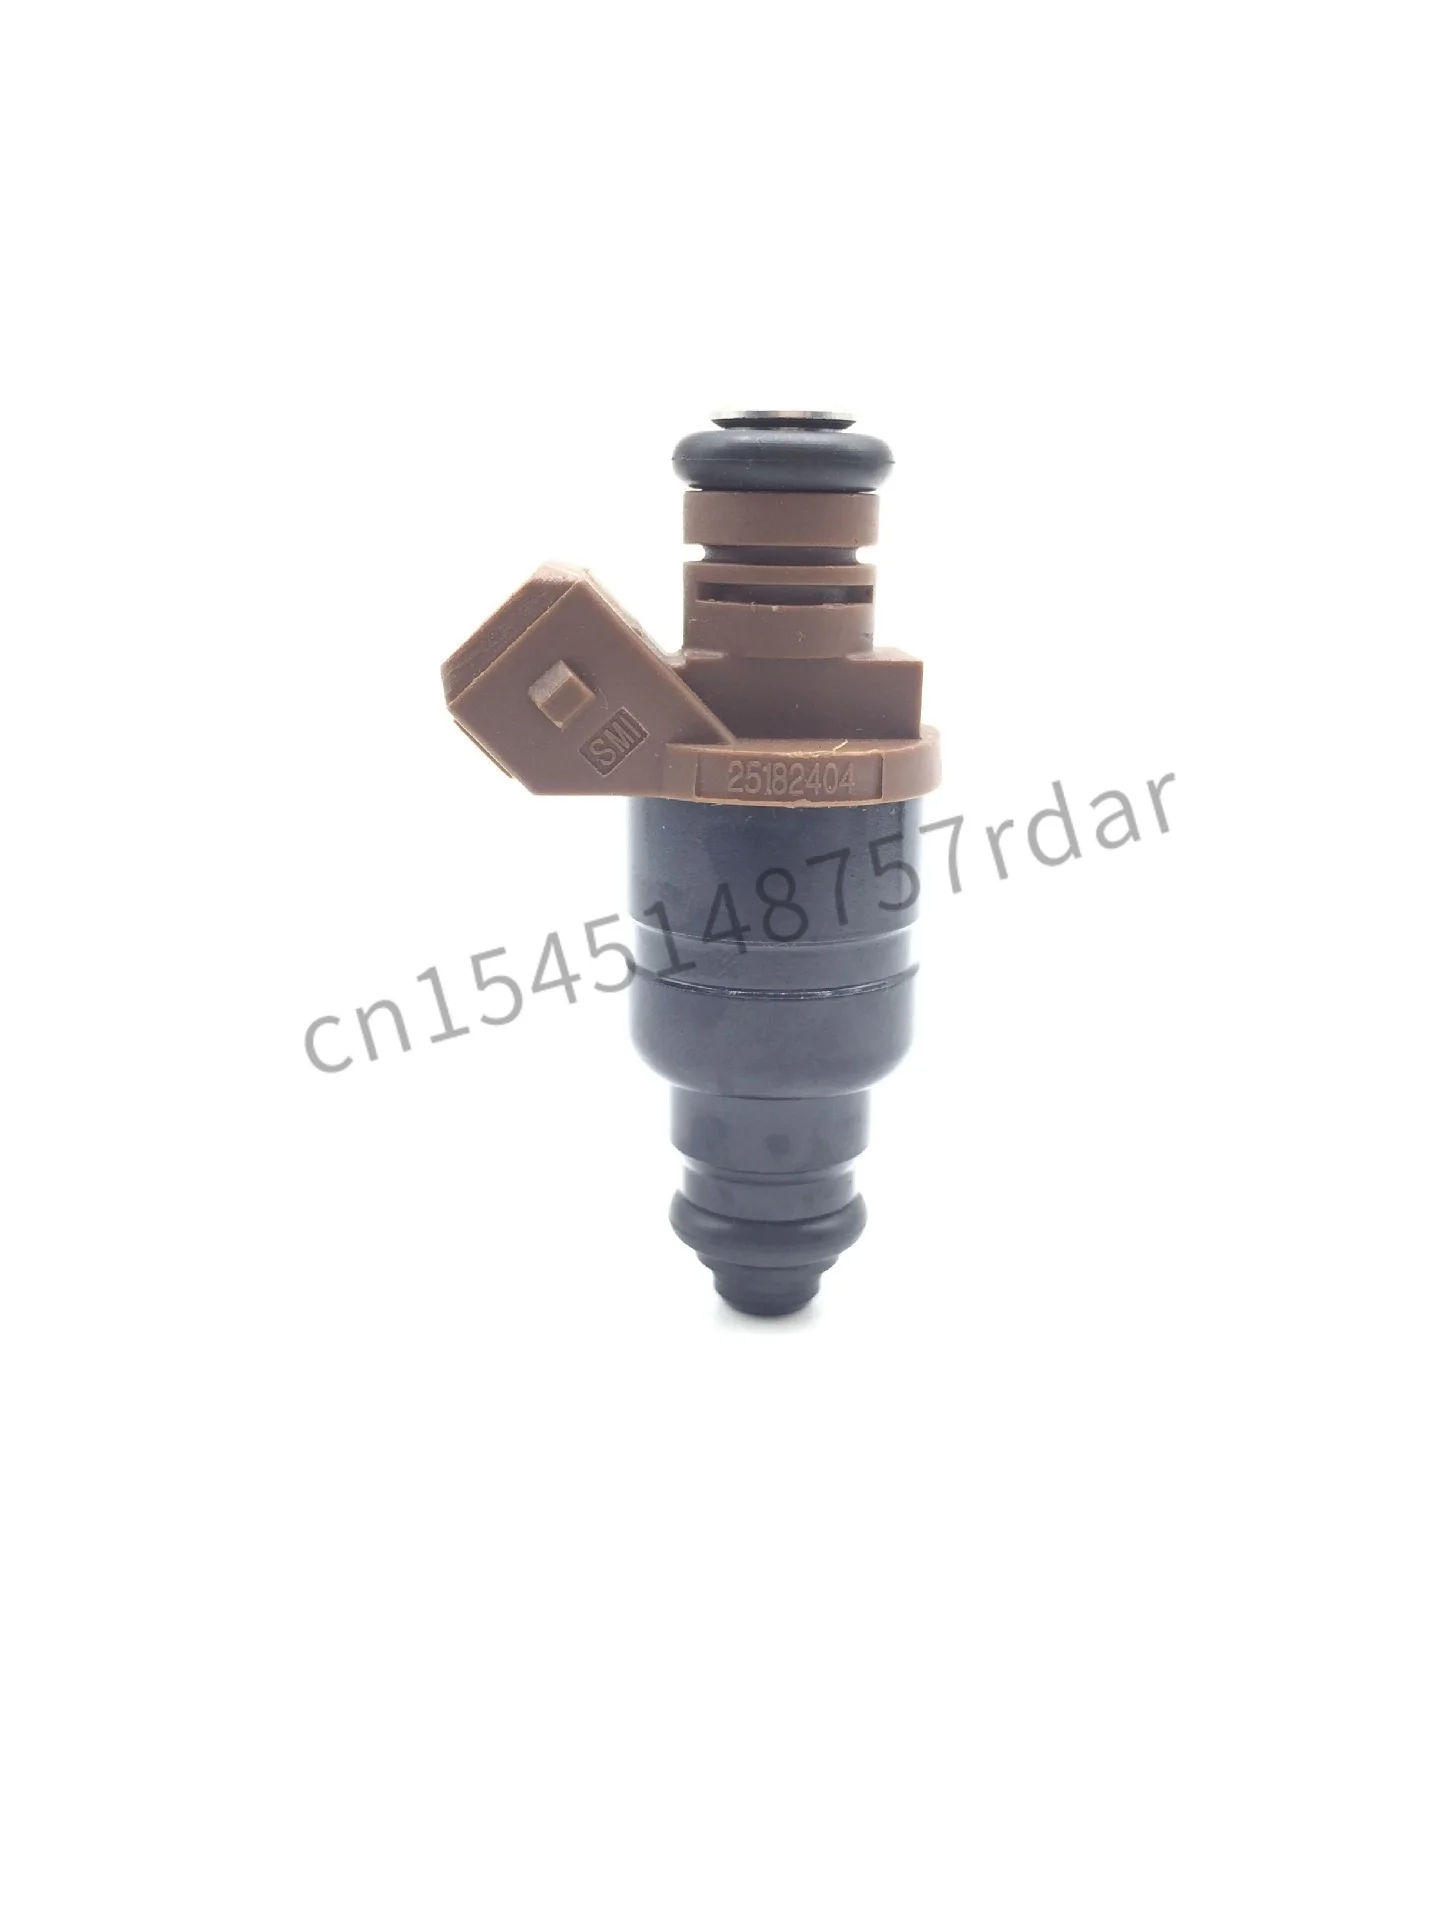 

4pcs The new product 25182404 of automobile fuel injection nozzle is suitable for Chevrolet, and it is preferred if the is